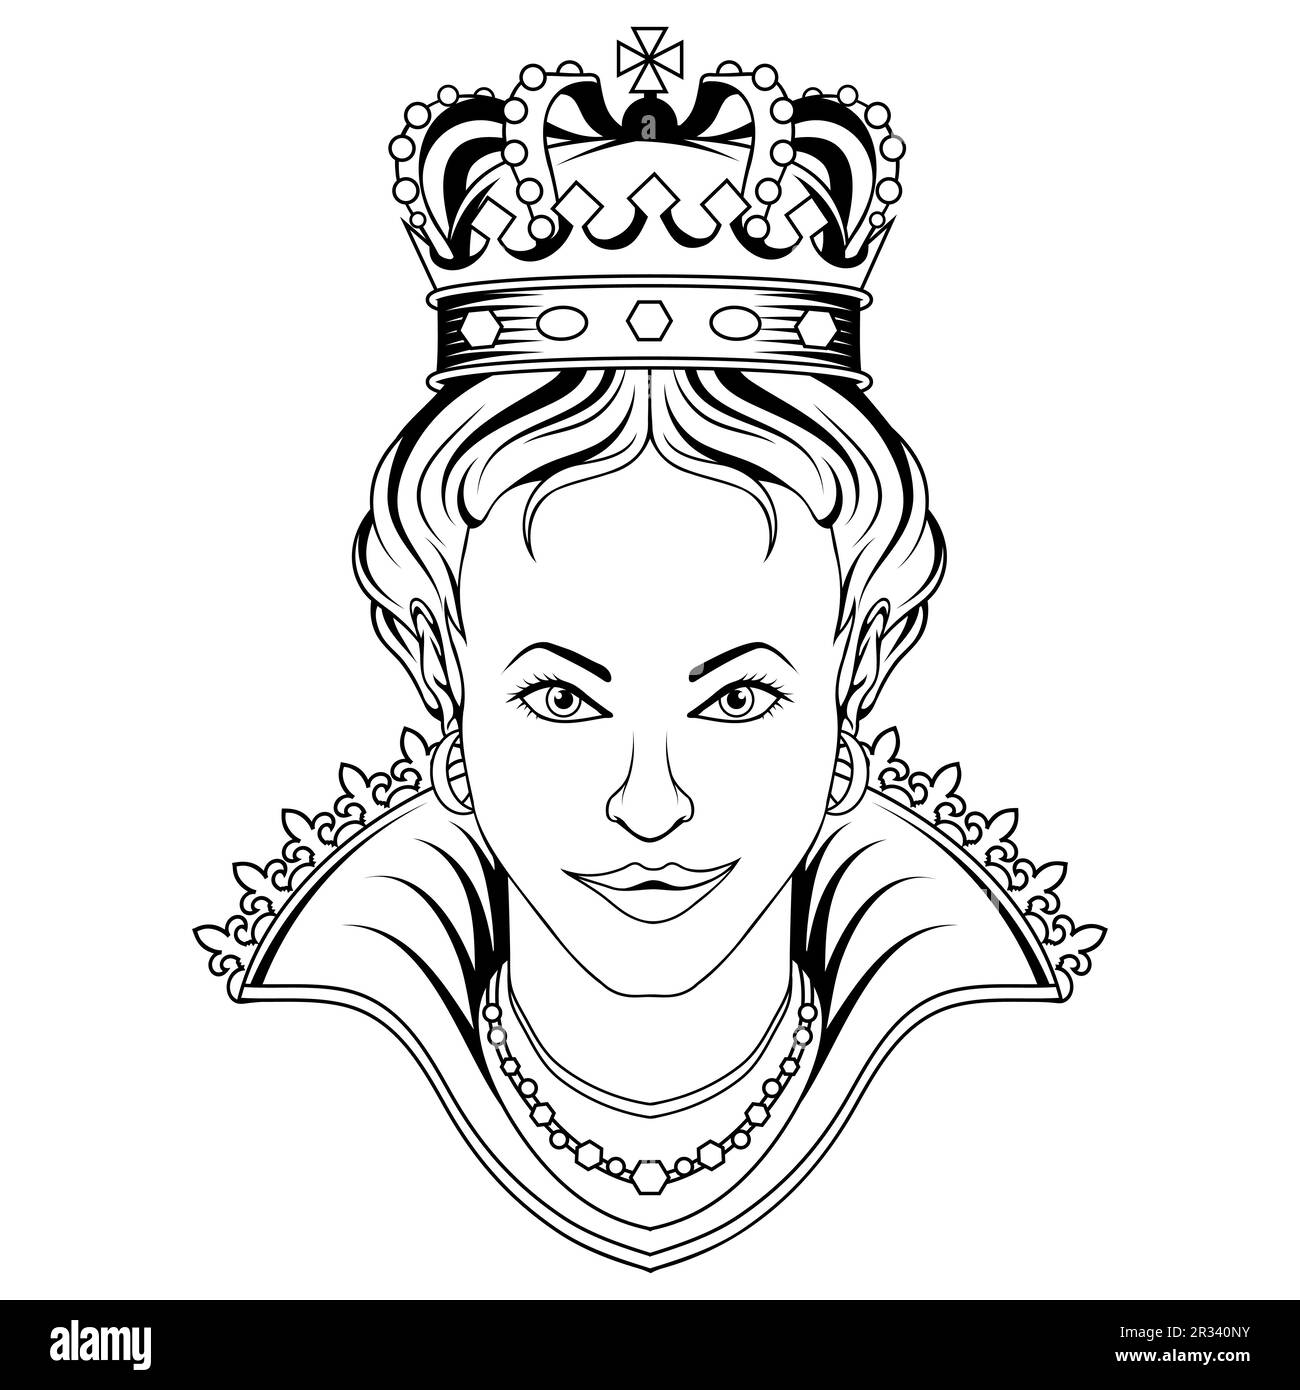 How to draw a Queen Princess easy step by step  YouTube